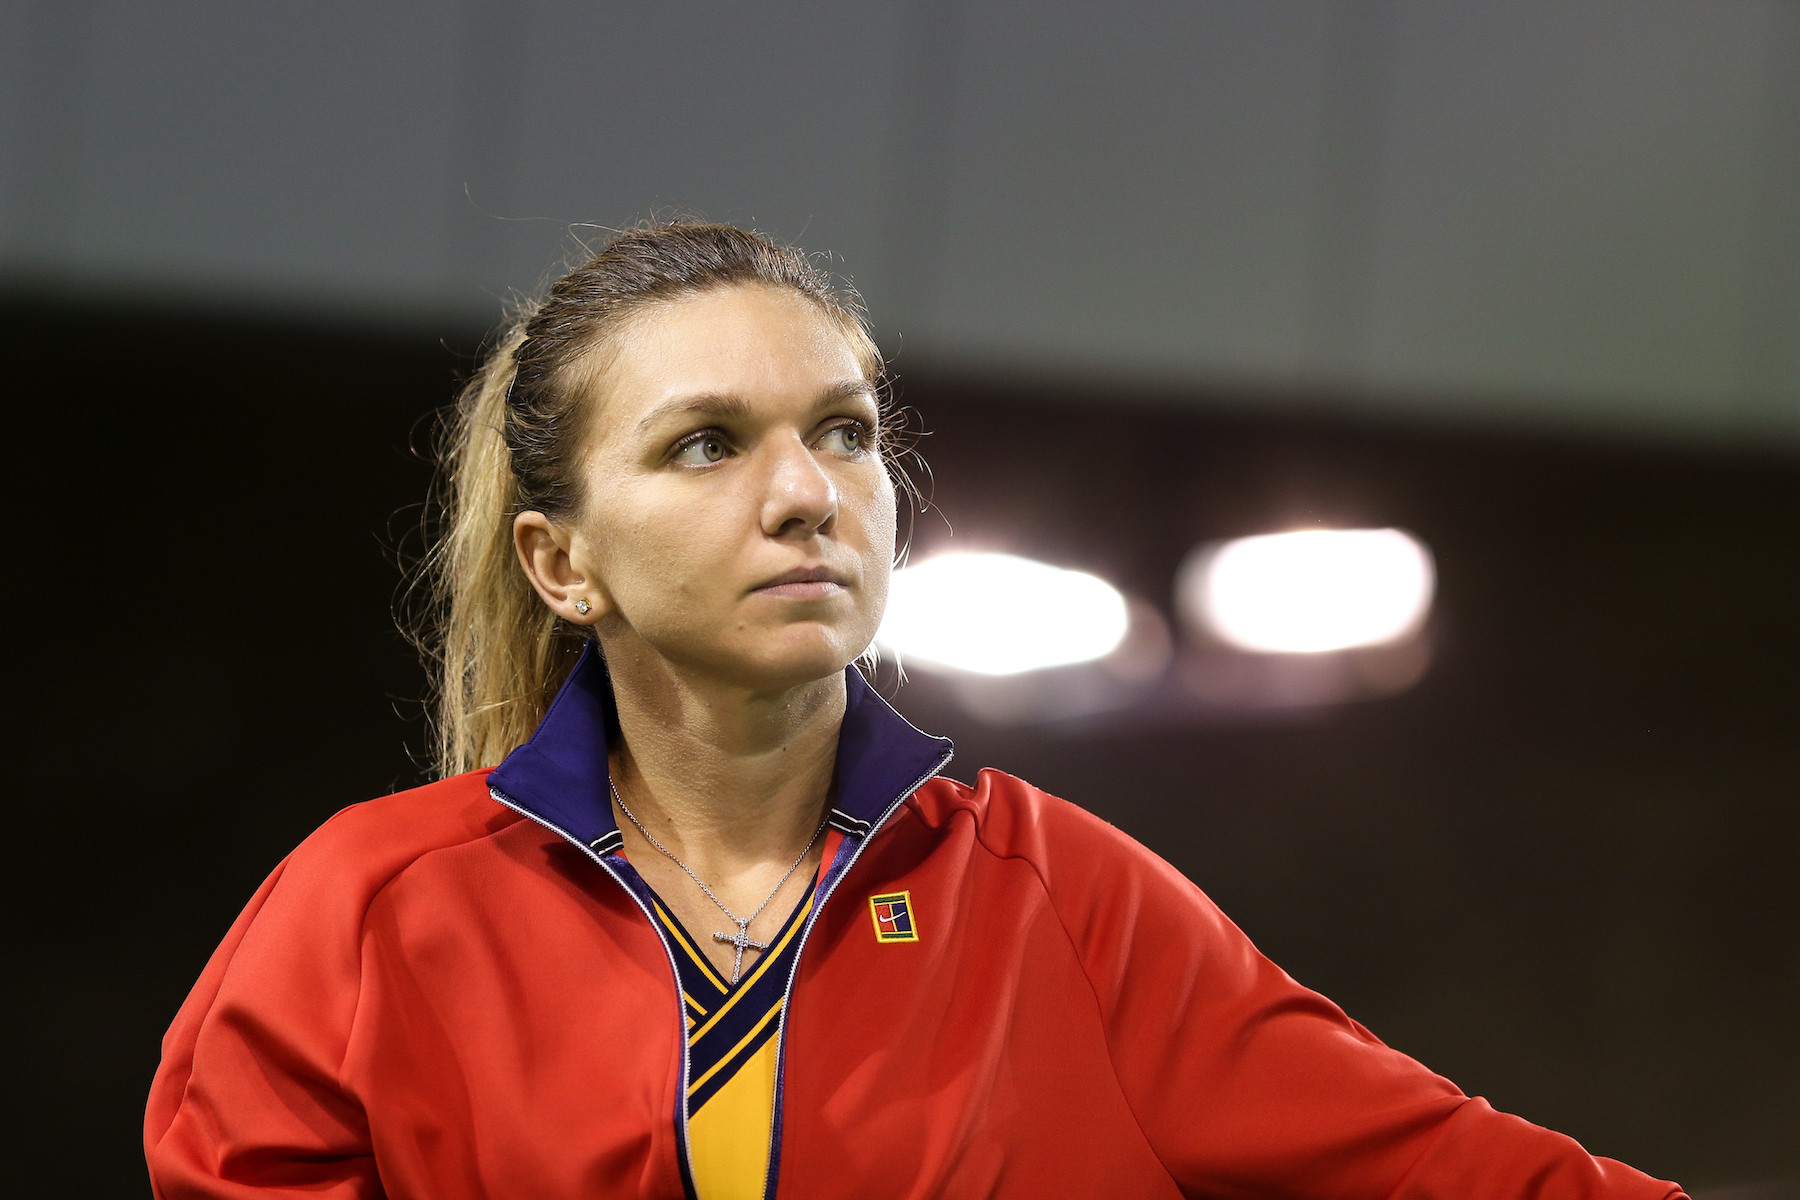 Romanian Simona Halep defeated in first game after her suspension was lifted